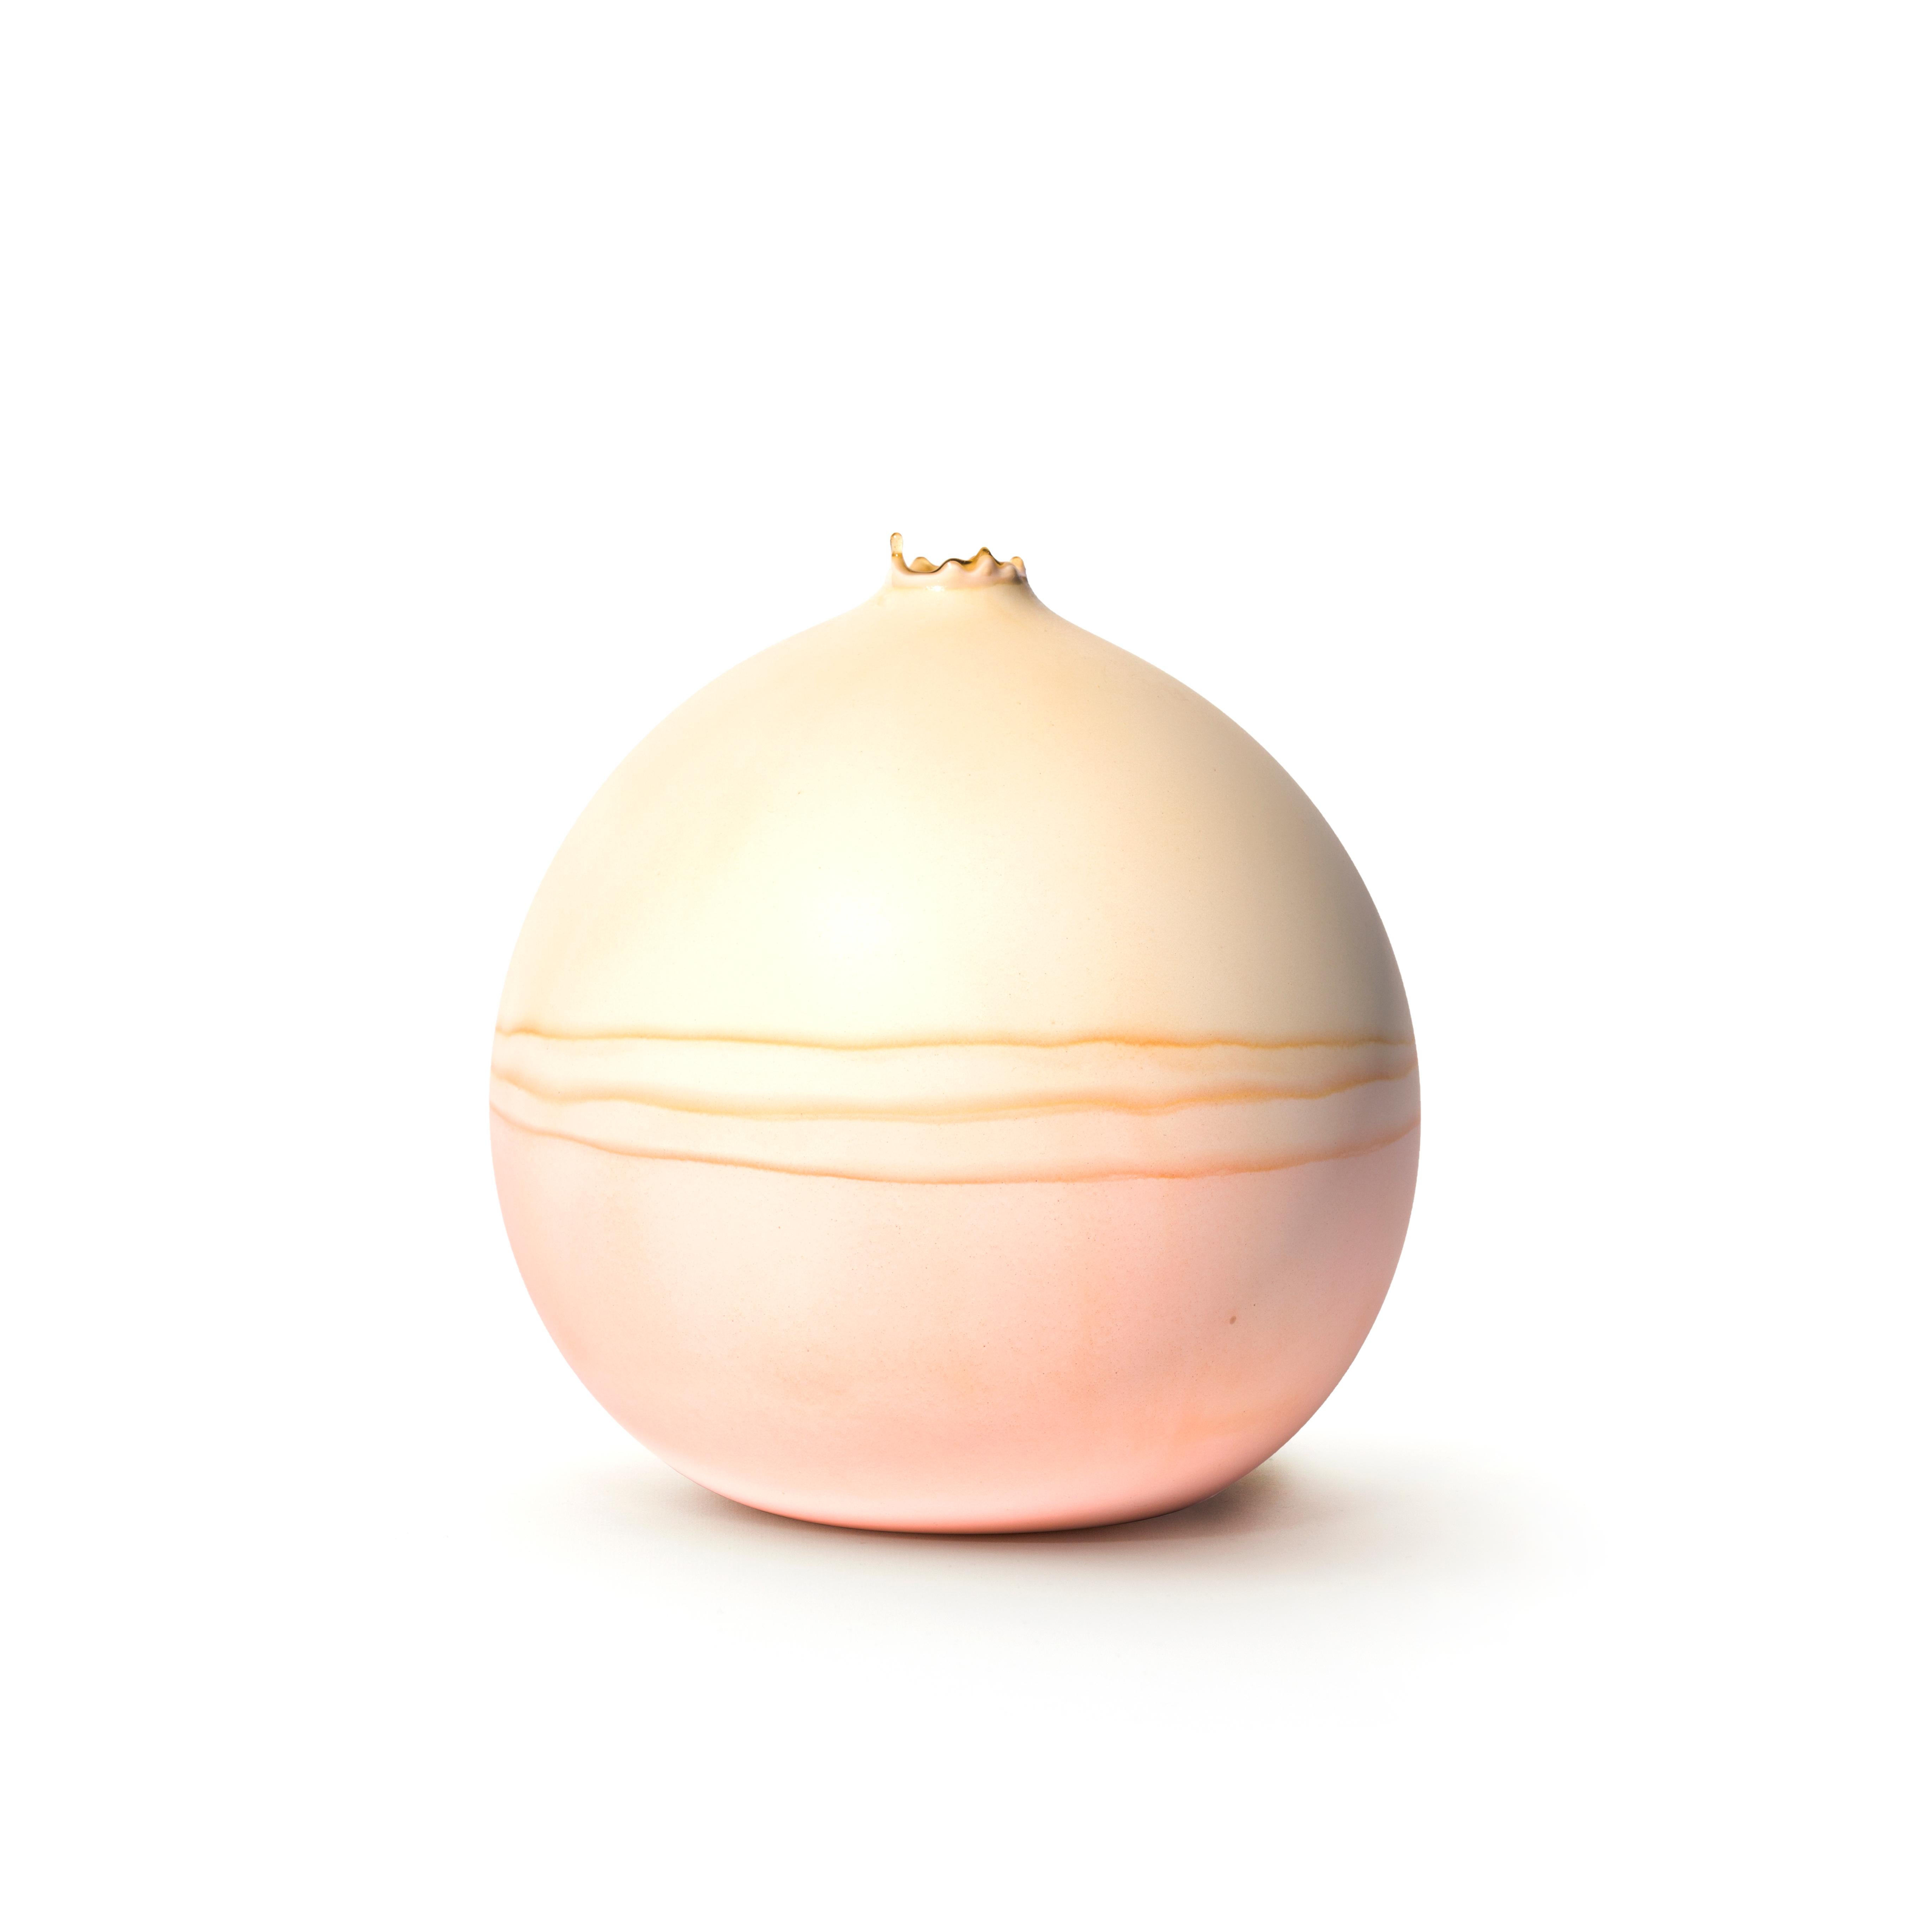 Bone and Peach Saturn Vase by Elyse Graham
Dimensions: W 20 x D 20 x H 23 cm
Materials: Plaster, Resin
MOLDED, DYED, AND FINISHED BY HAND IN LA. CUSTOMIZATION
AVAILABLE.
ALL PIECES ARE MADE TO ORDER

This collection of vessels is inspired by